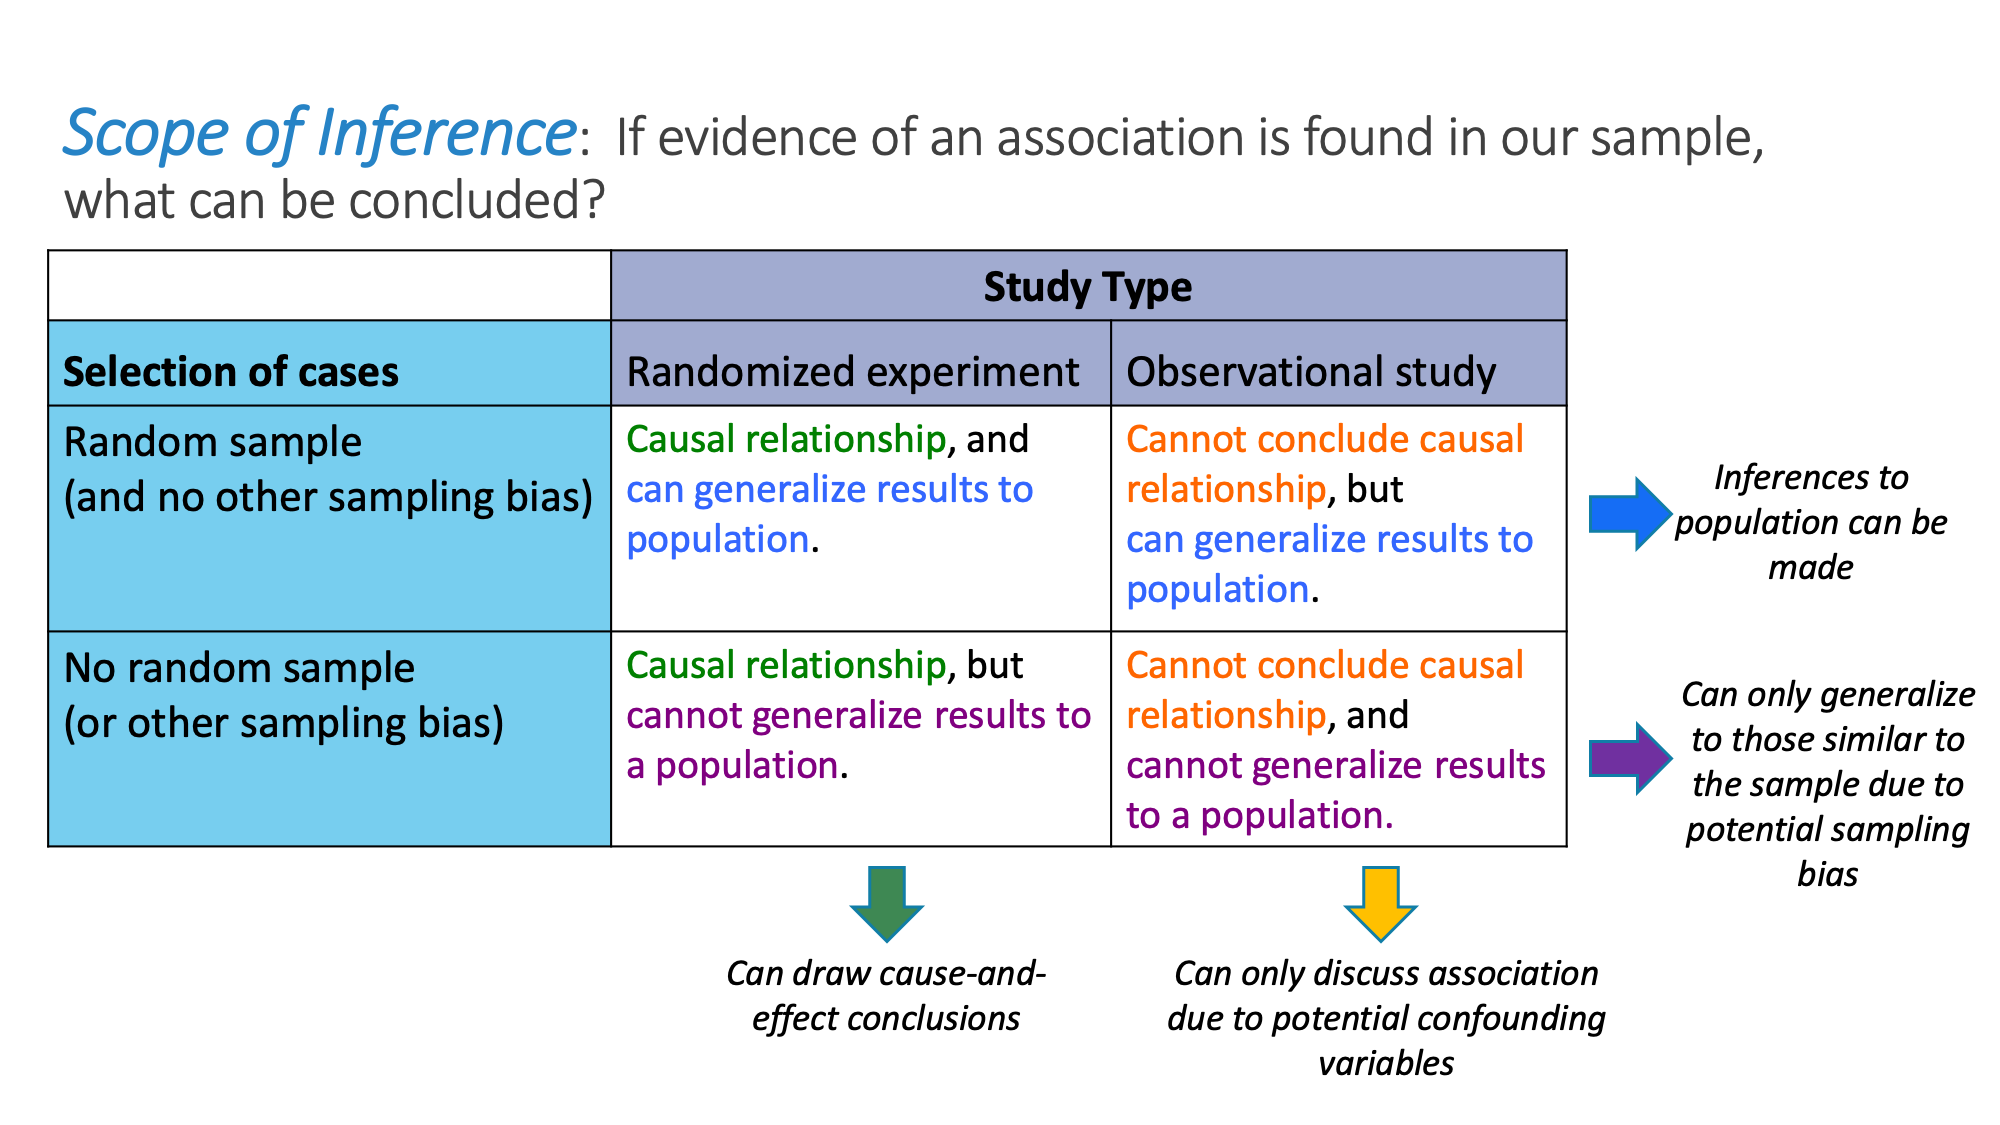 Determining scope of inference of a study.